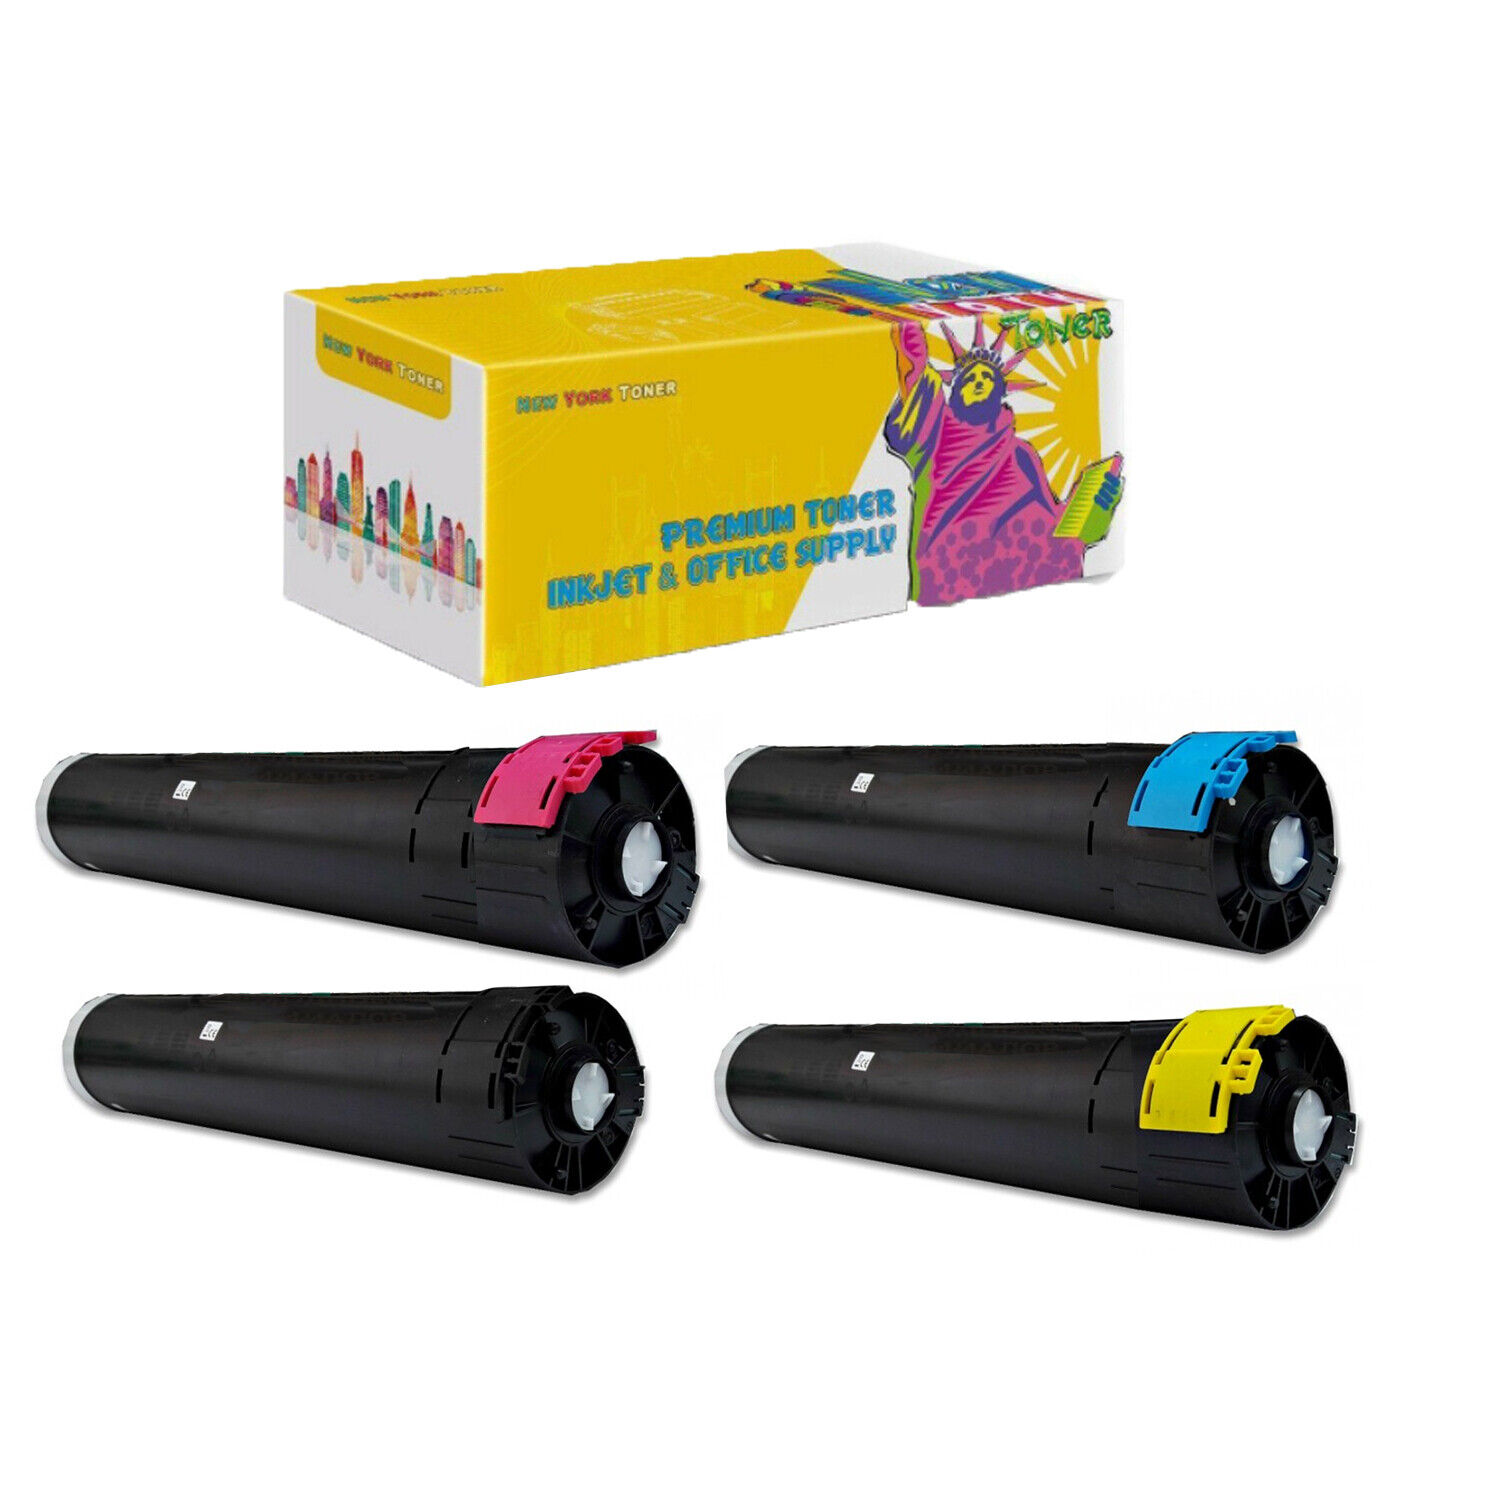 1Set Remanufactured Toner METERED 006R01470 - 006R01473 for Xerox Color 800